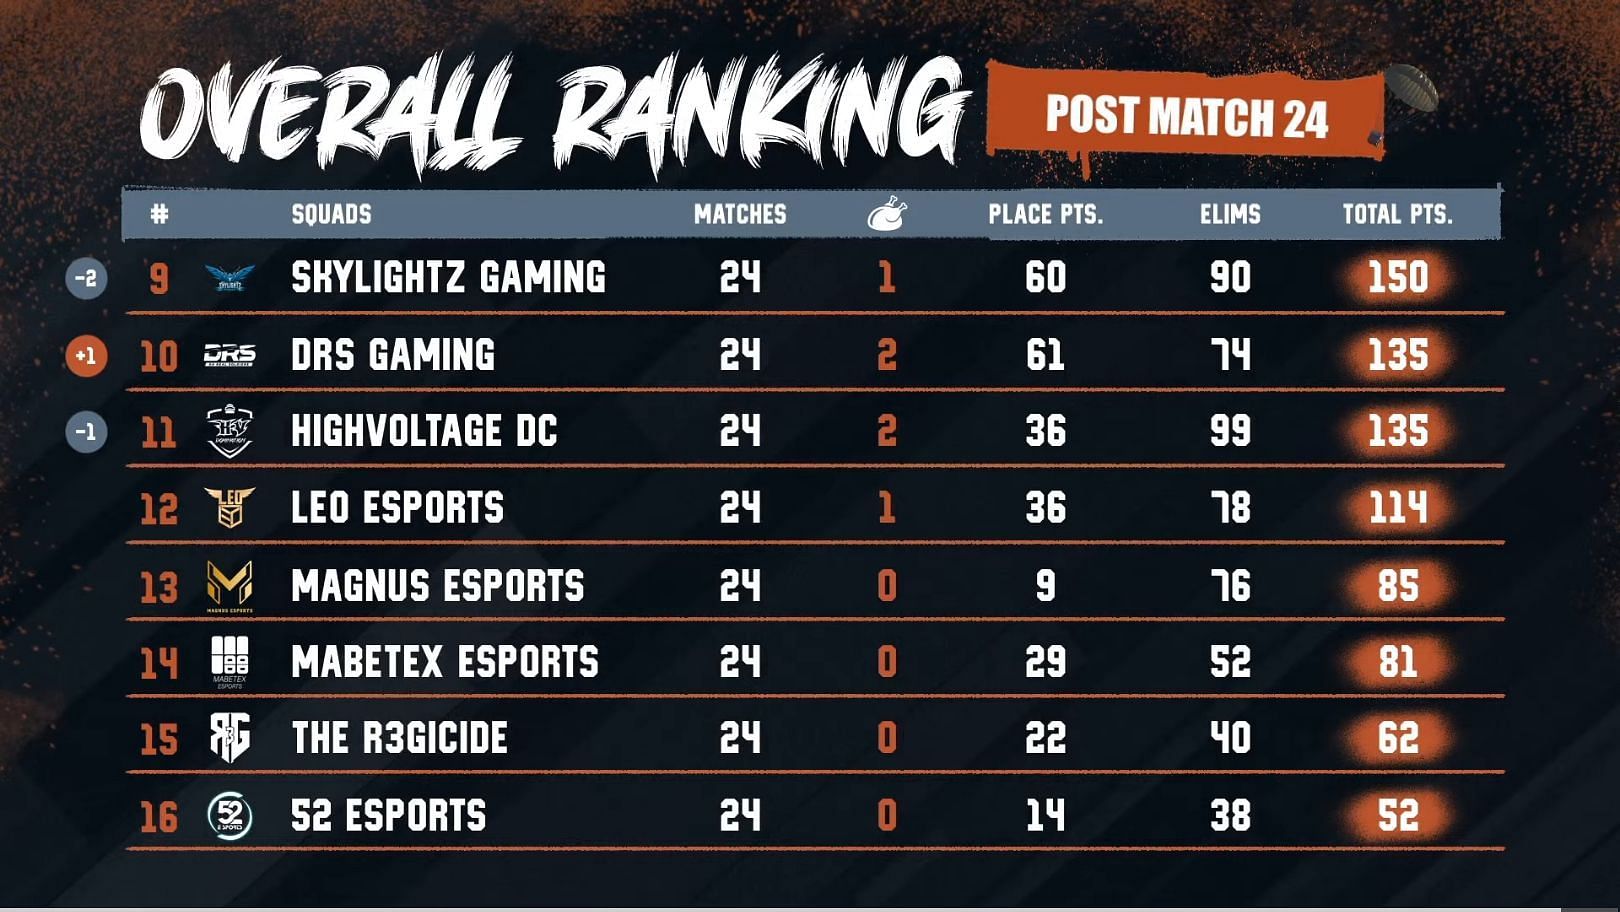 DRS Gaming came 10th in overall rankings (Image via PUBG Mobile)